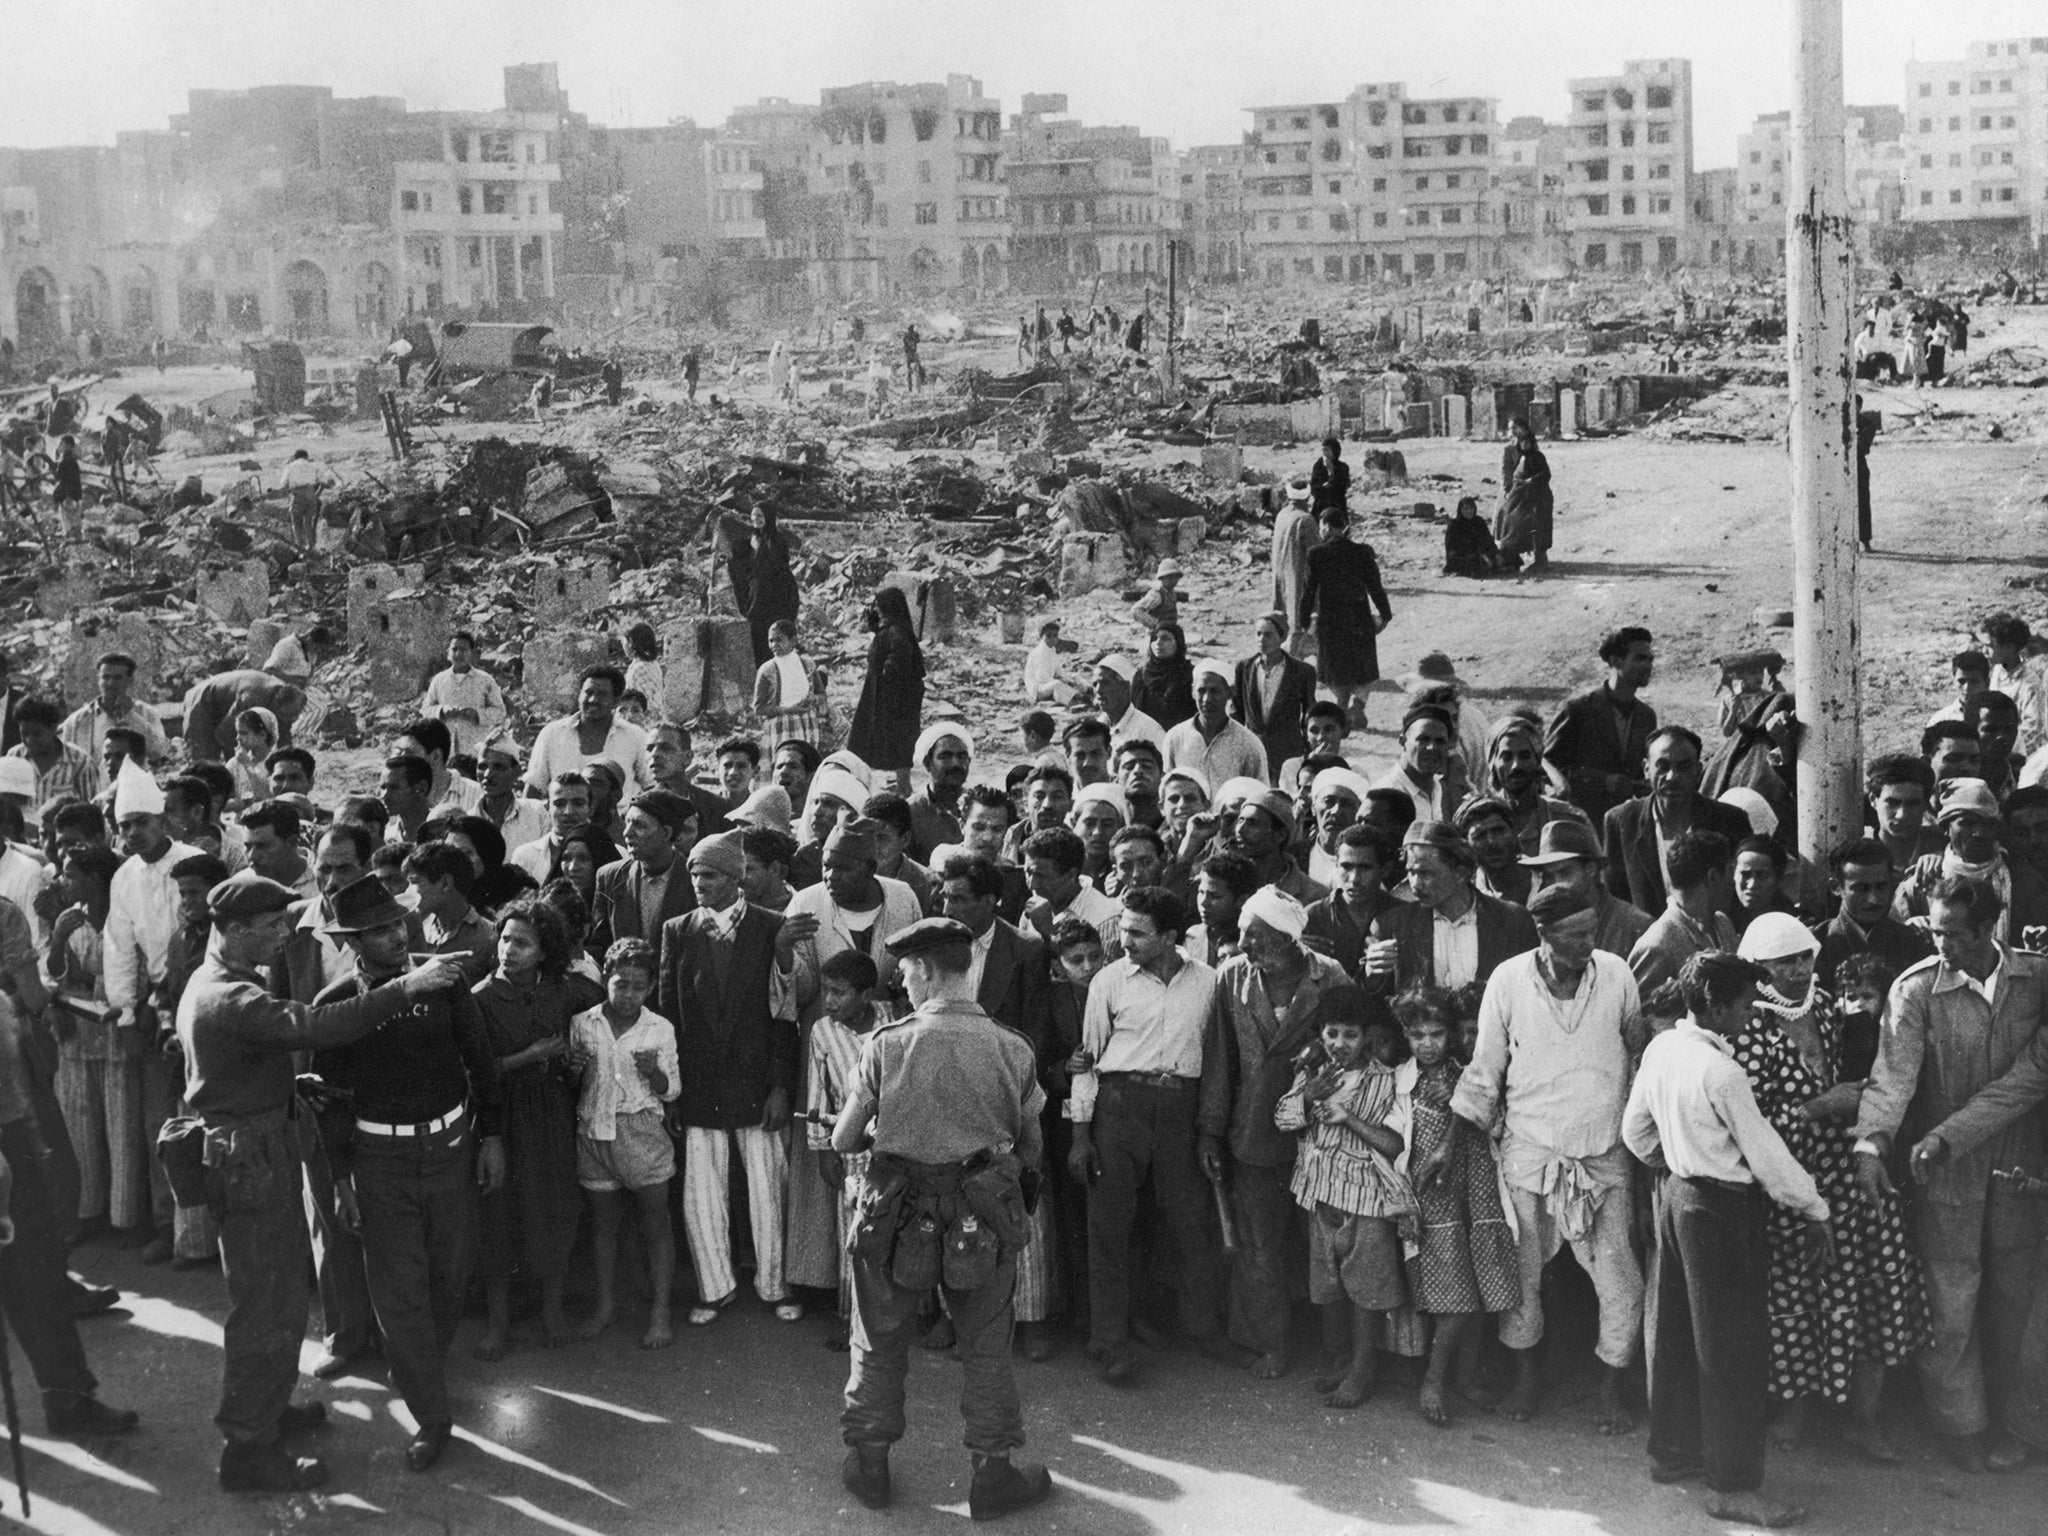 12 November 1956: British soldiers supervise a crowd in Port Said while food is distributed during the Suez Crisis